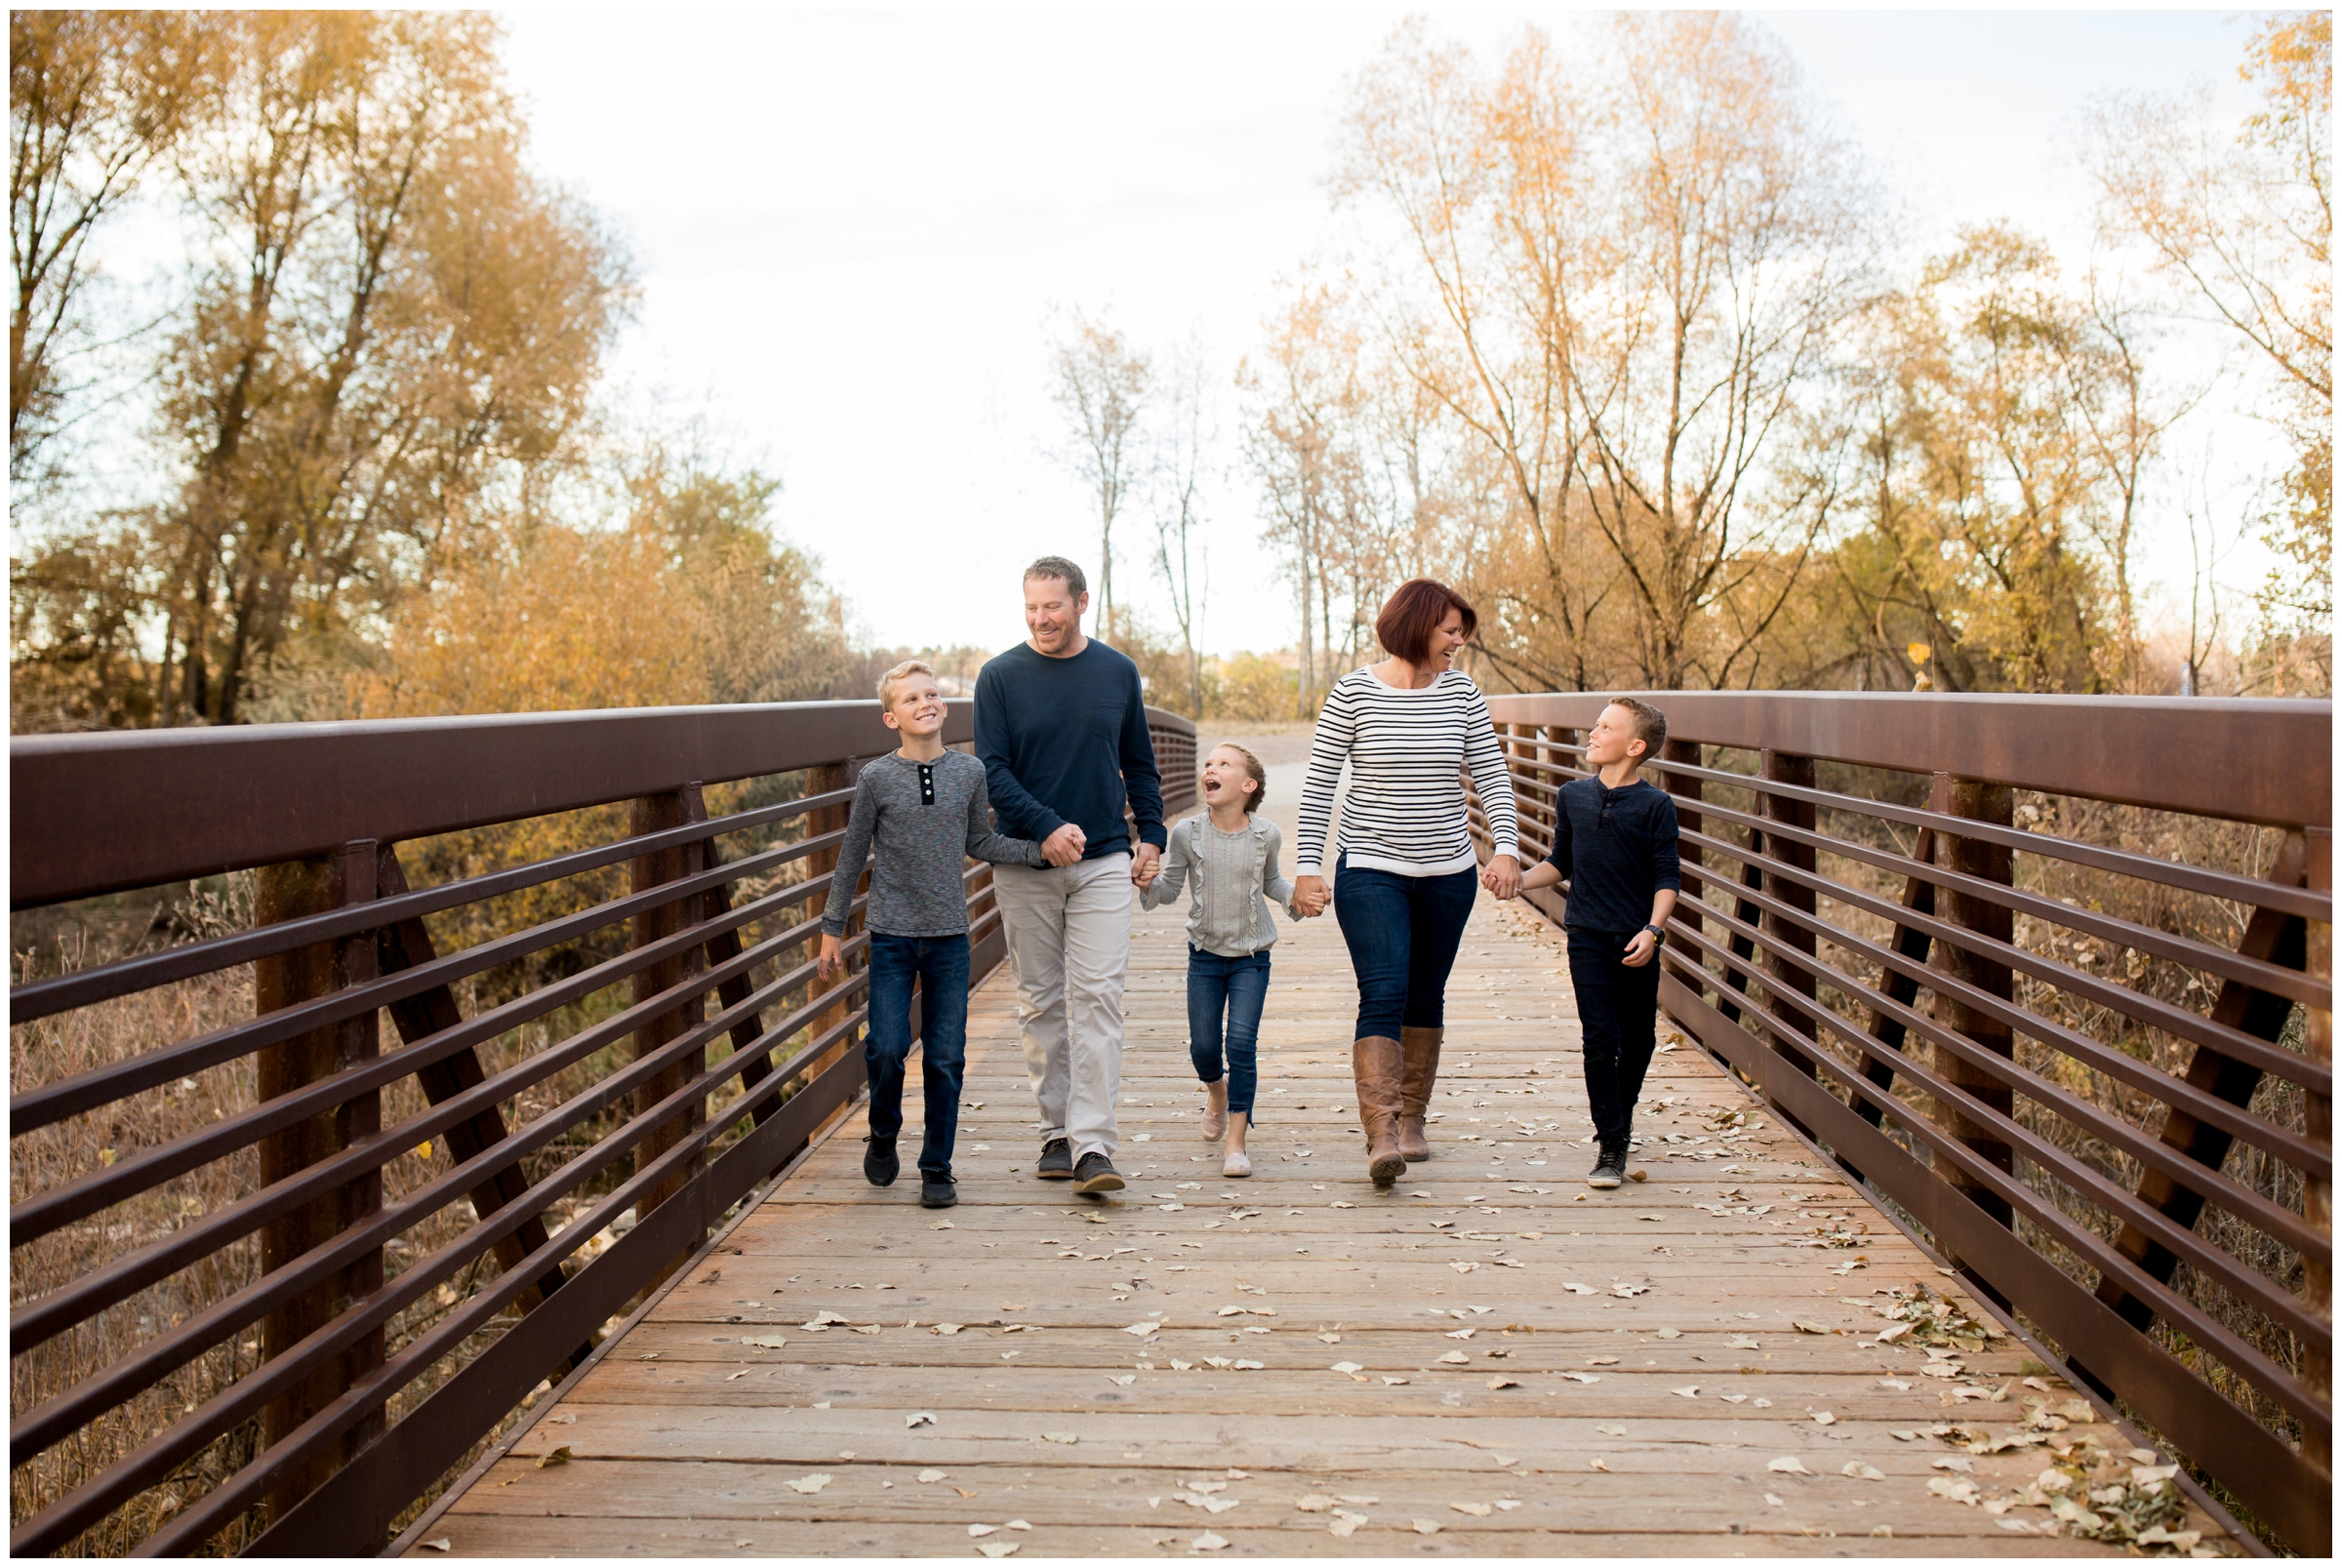 family walking on bridge candidly during Boulder County family photos at Golden Ponds by Longmont Colorado portrait photographer Plum Pretty Photography